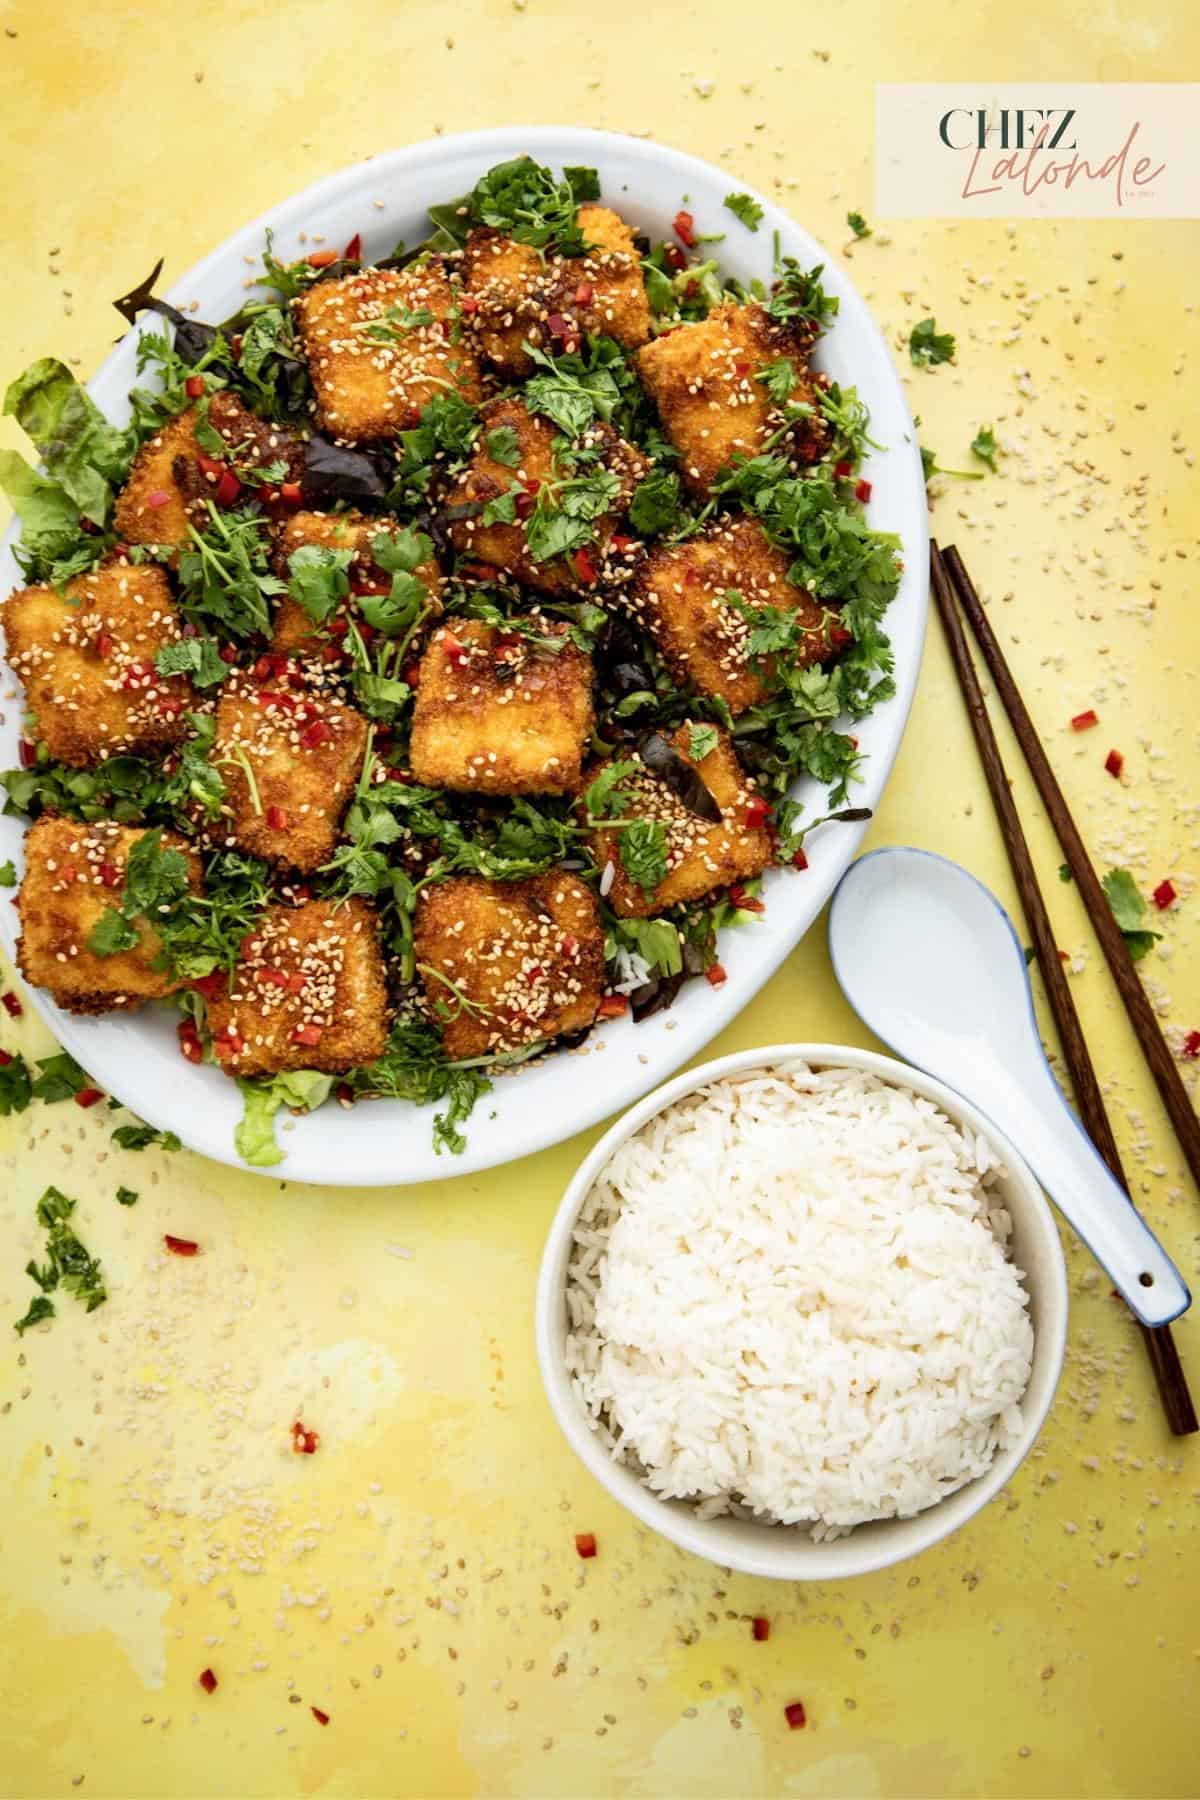 A plate of air fried tofu on a bed of shredding lettuce and white plate.  A bowl of steamed rice, spoon, and a pair of chopsticks are next to the plate of air fried tofu. 